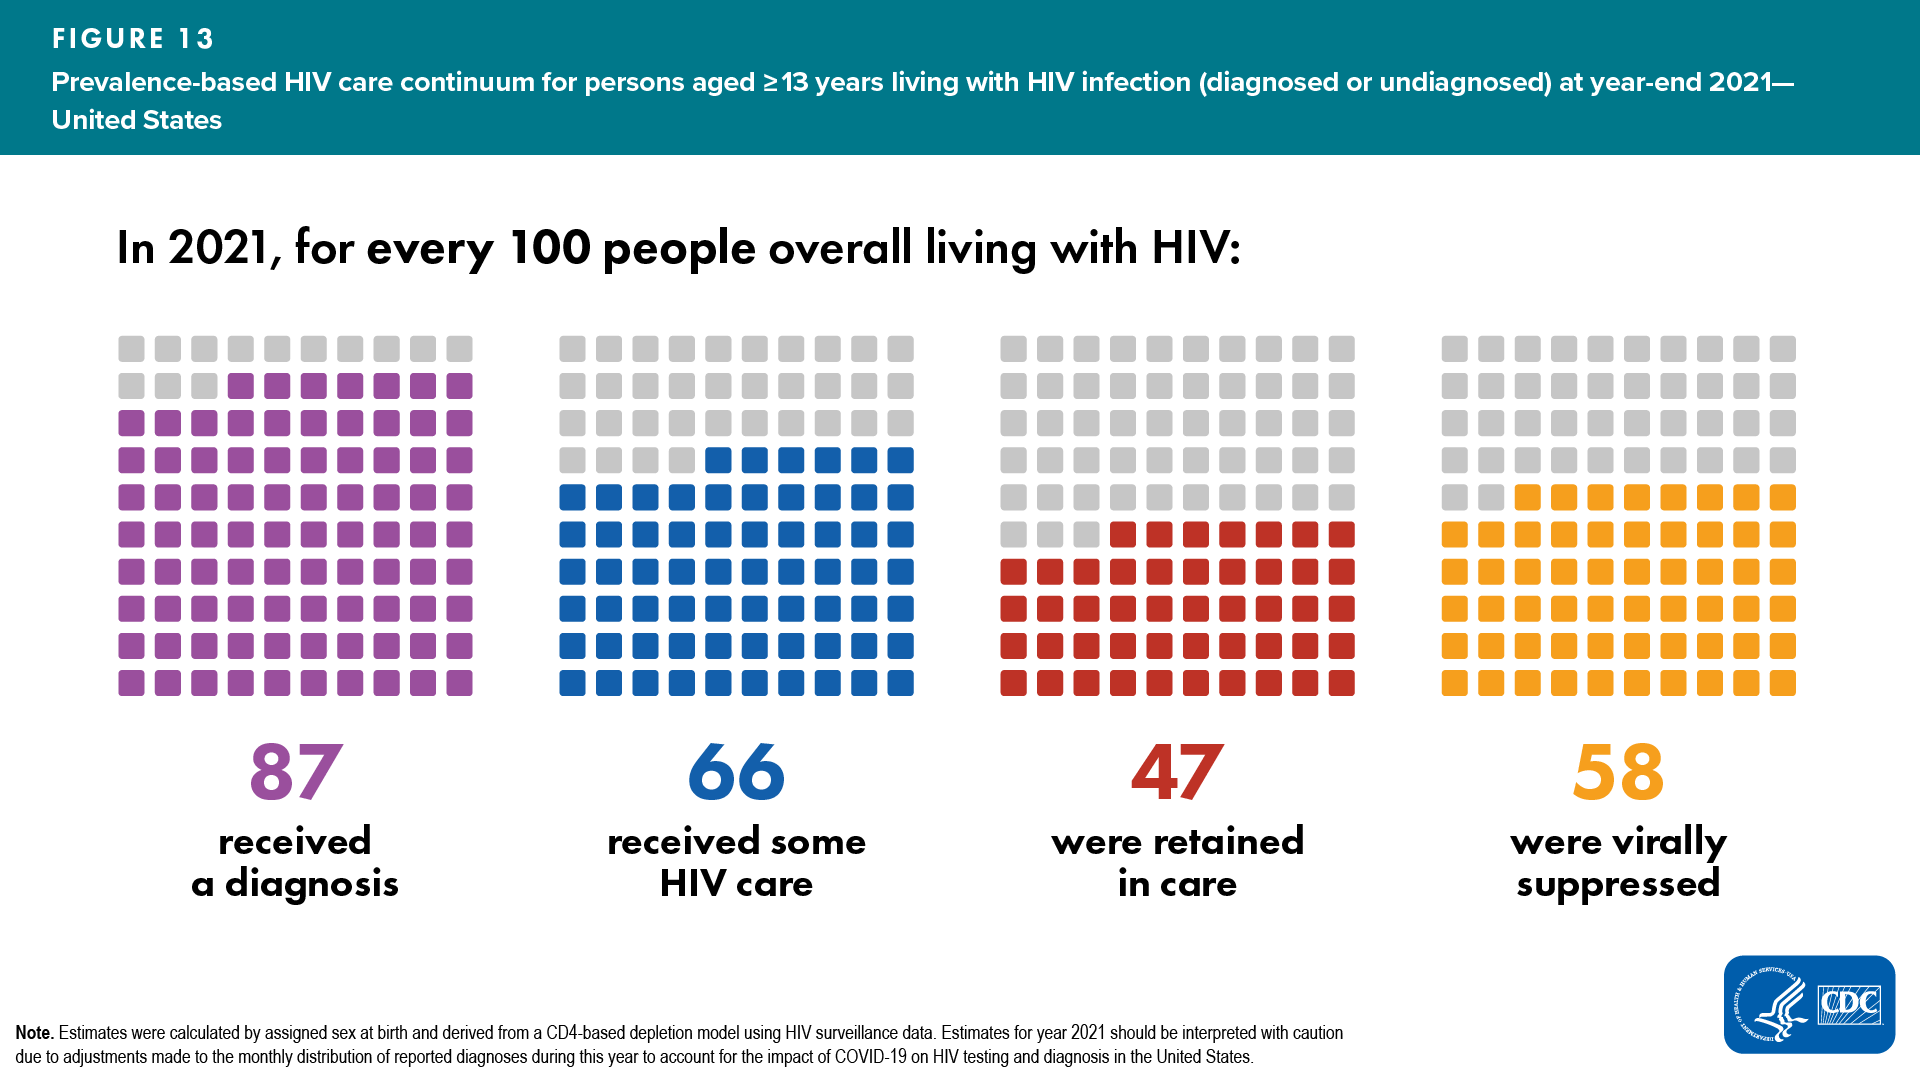 Figure 13. Prevalence-based HIV care continuum for persons aged ≥13 years living with HIV infection (diagnosed or undiagnosed) at year-end 2021—United States